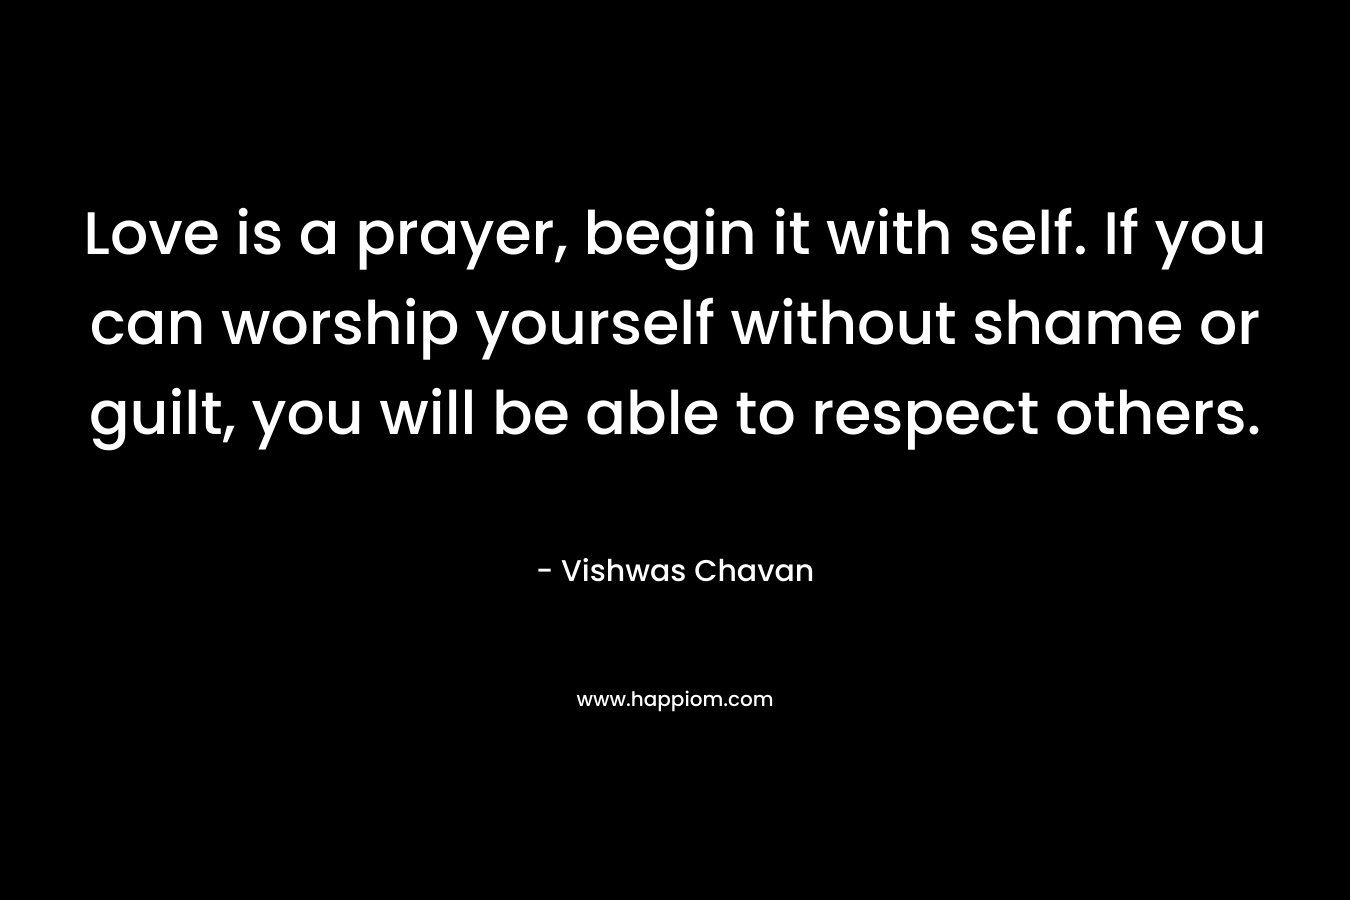 Love is a prayer, begin it with self. If you can worship yourself without shame or guilt, you will be able to respect others.